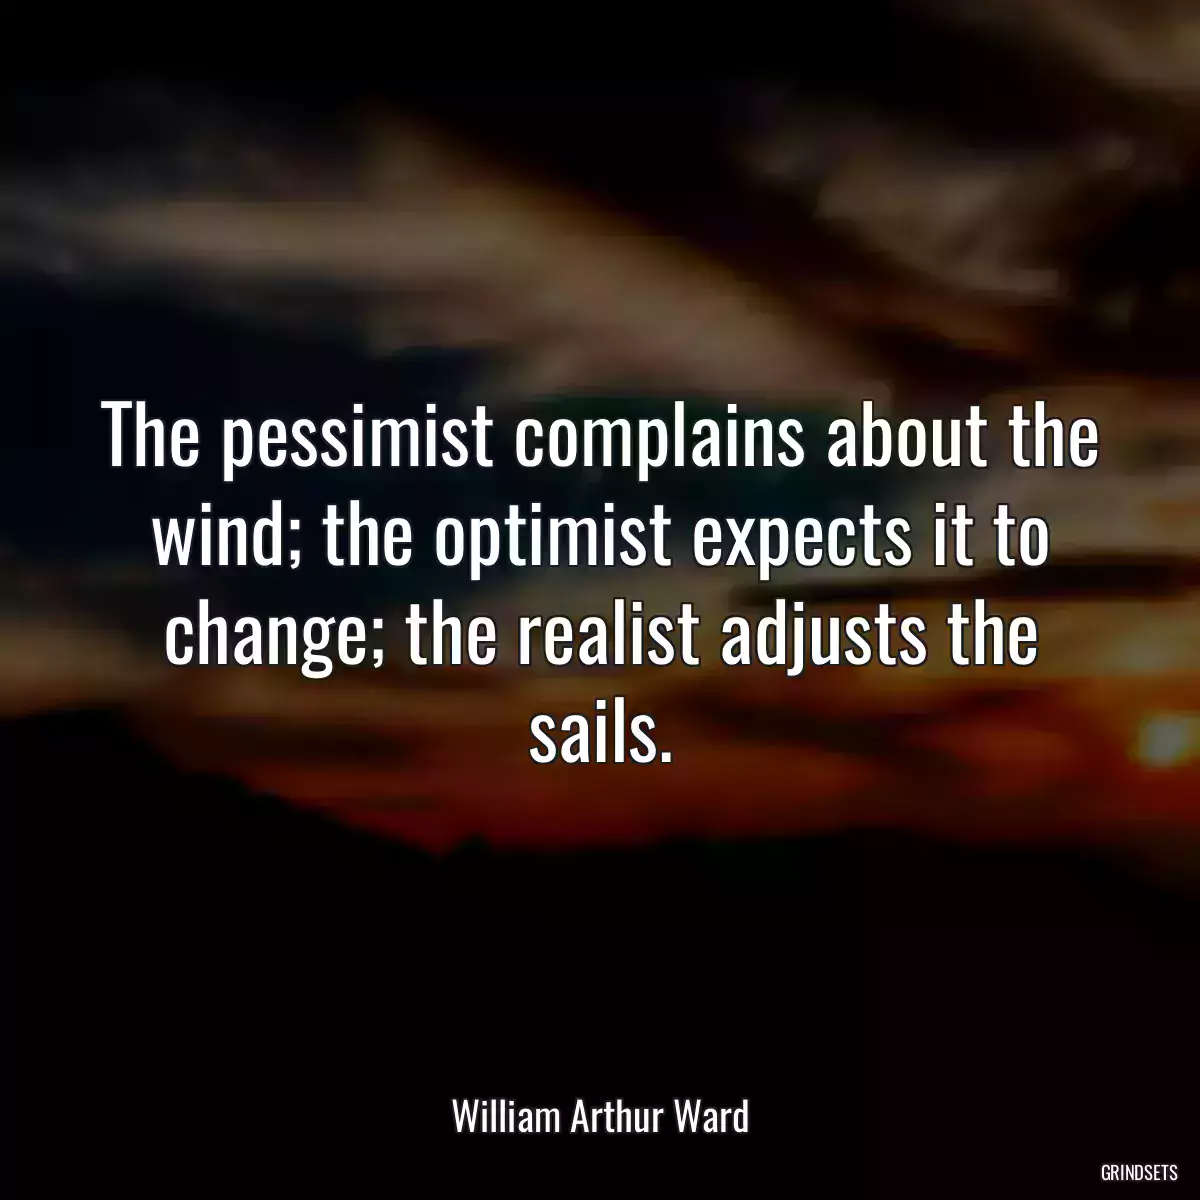 The pessimist complains about the wind; the optimist expects it to change; the realist adjusts the sails.